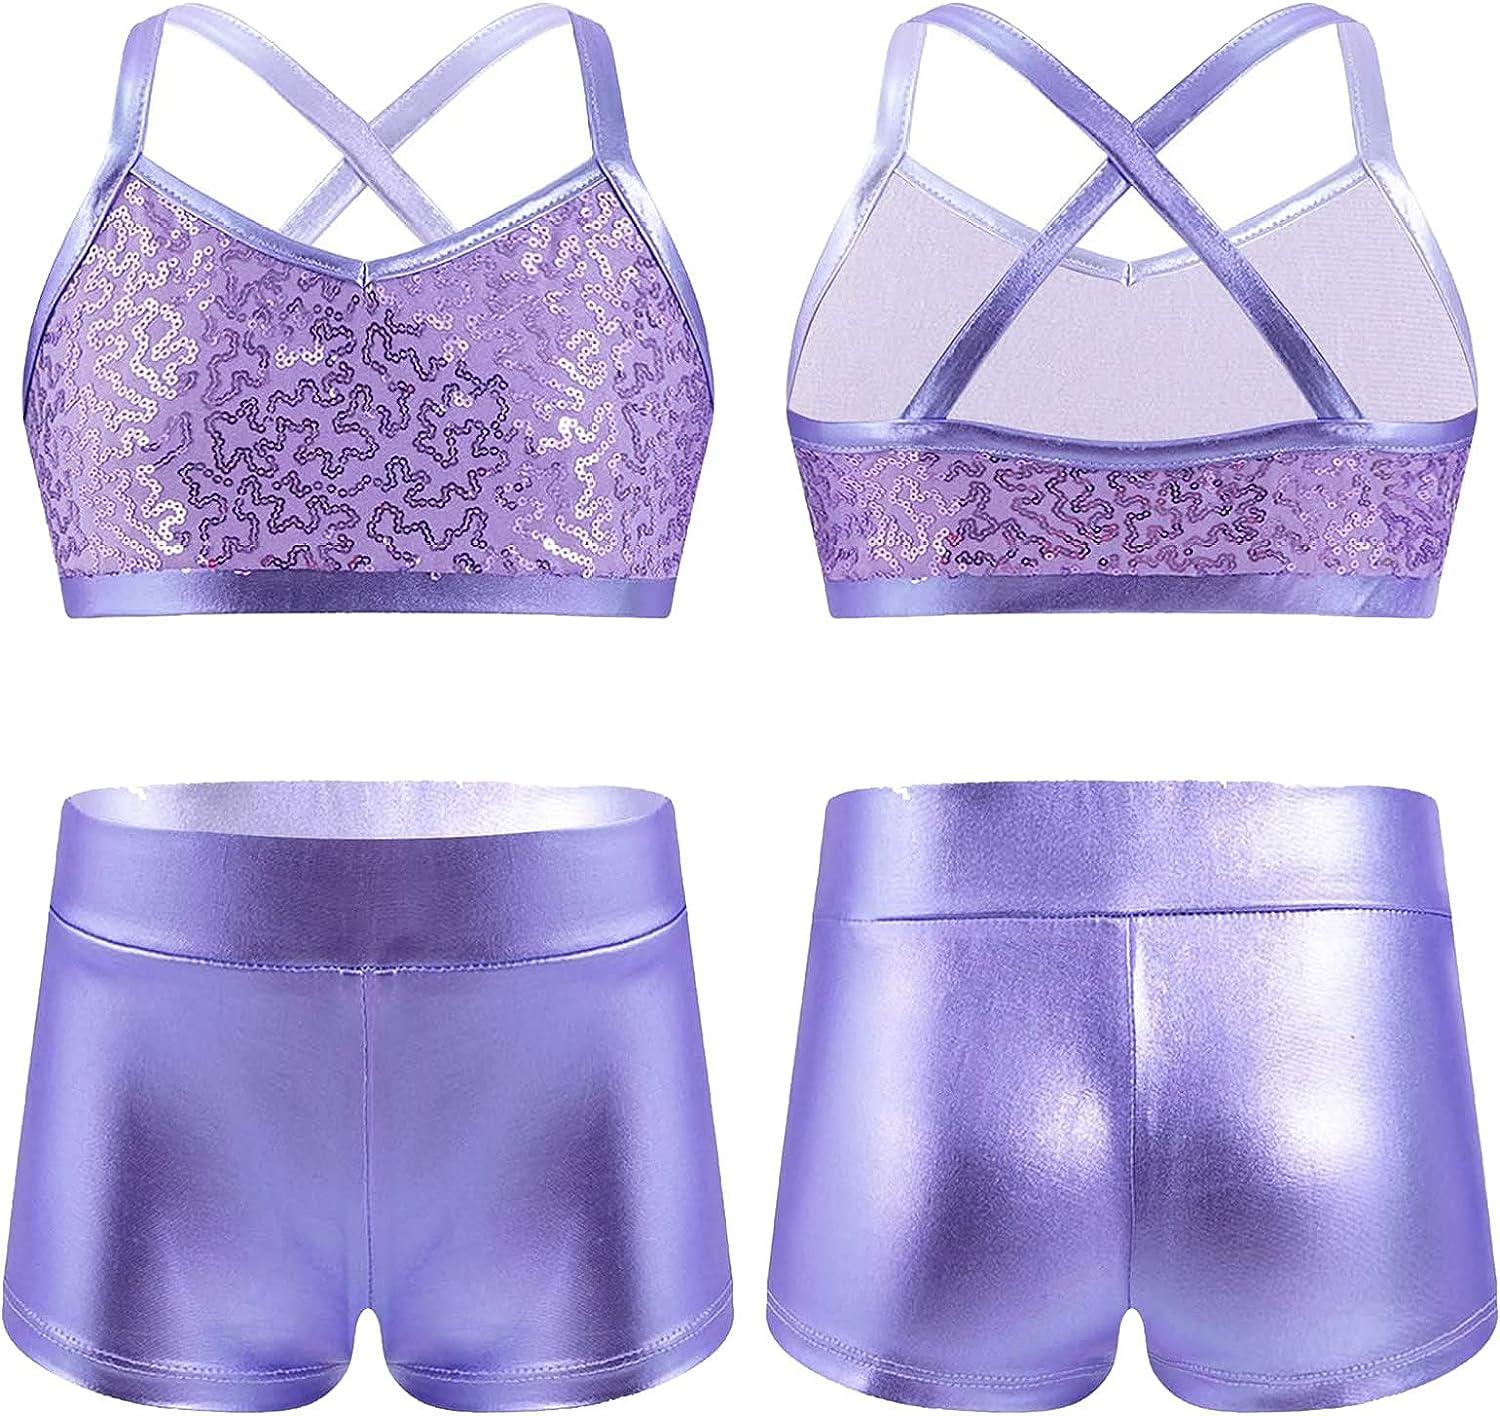 YUUMIN Kids Girls Crop Tops and Shorts Dance Outfits 2 Pieces Shiny Sequins  Dance Costumes Ballet Gymnastics Leotard Purple 7-8 Years